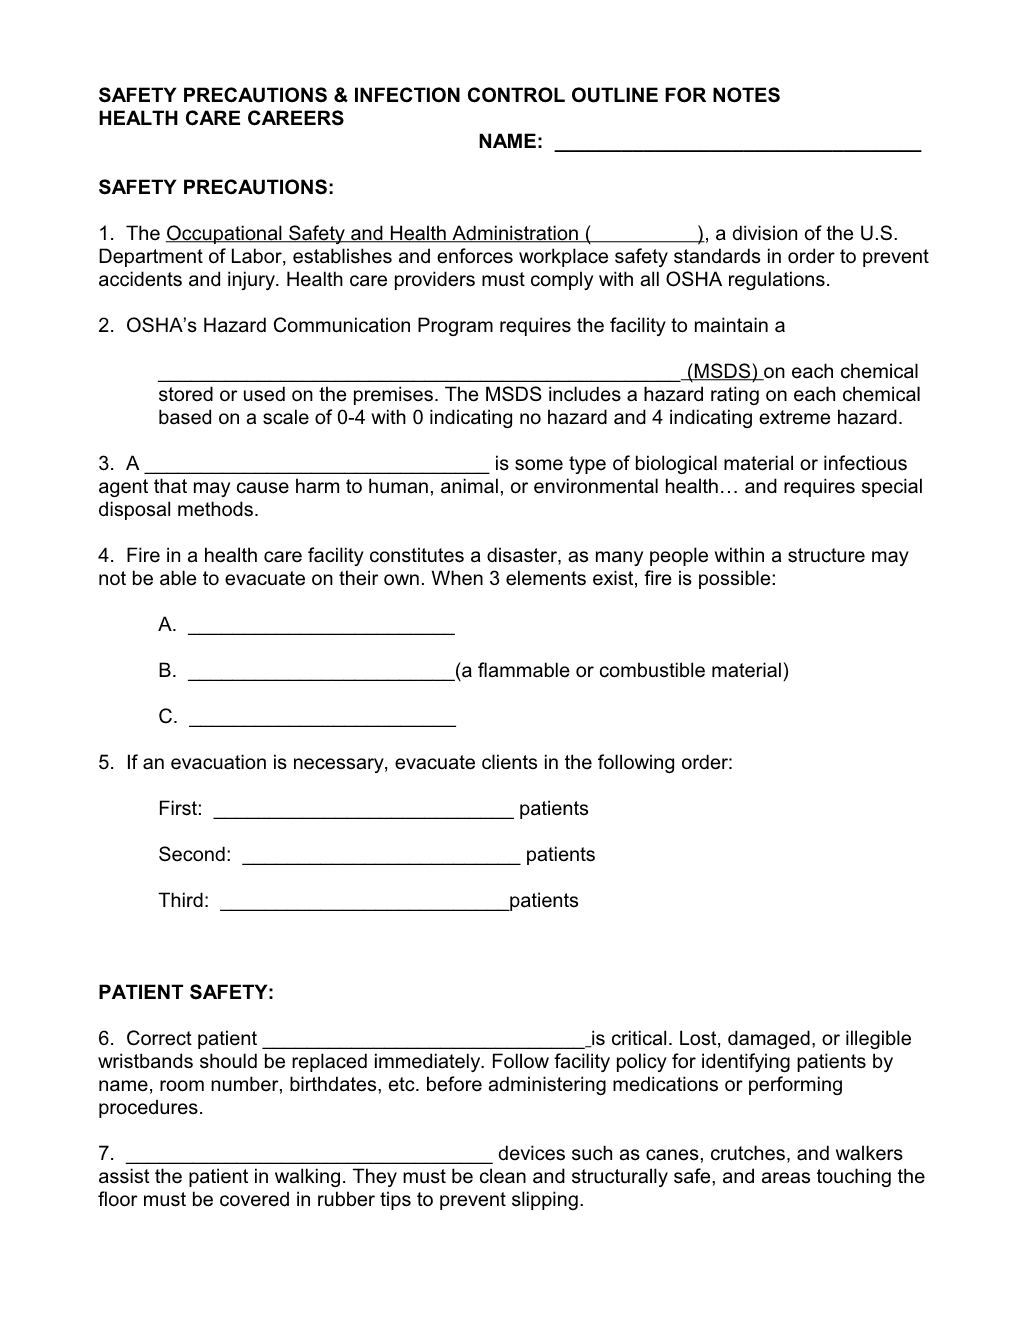 Safety Precautions & Infection Control Outline for Notes